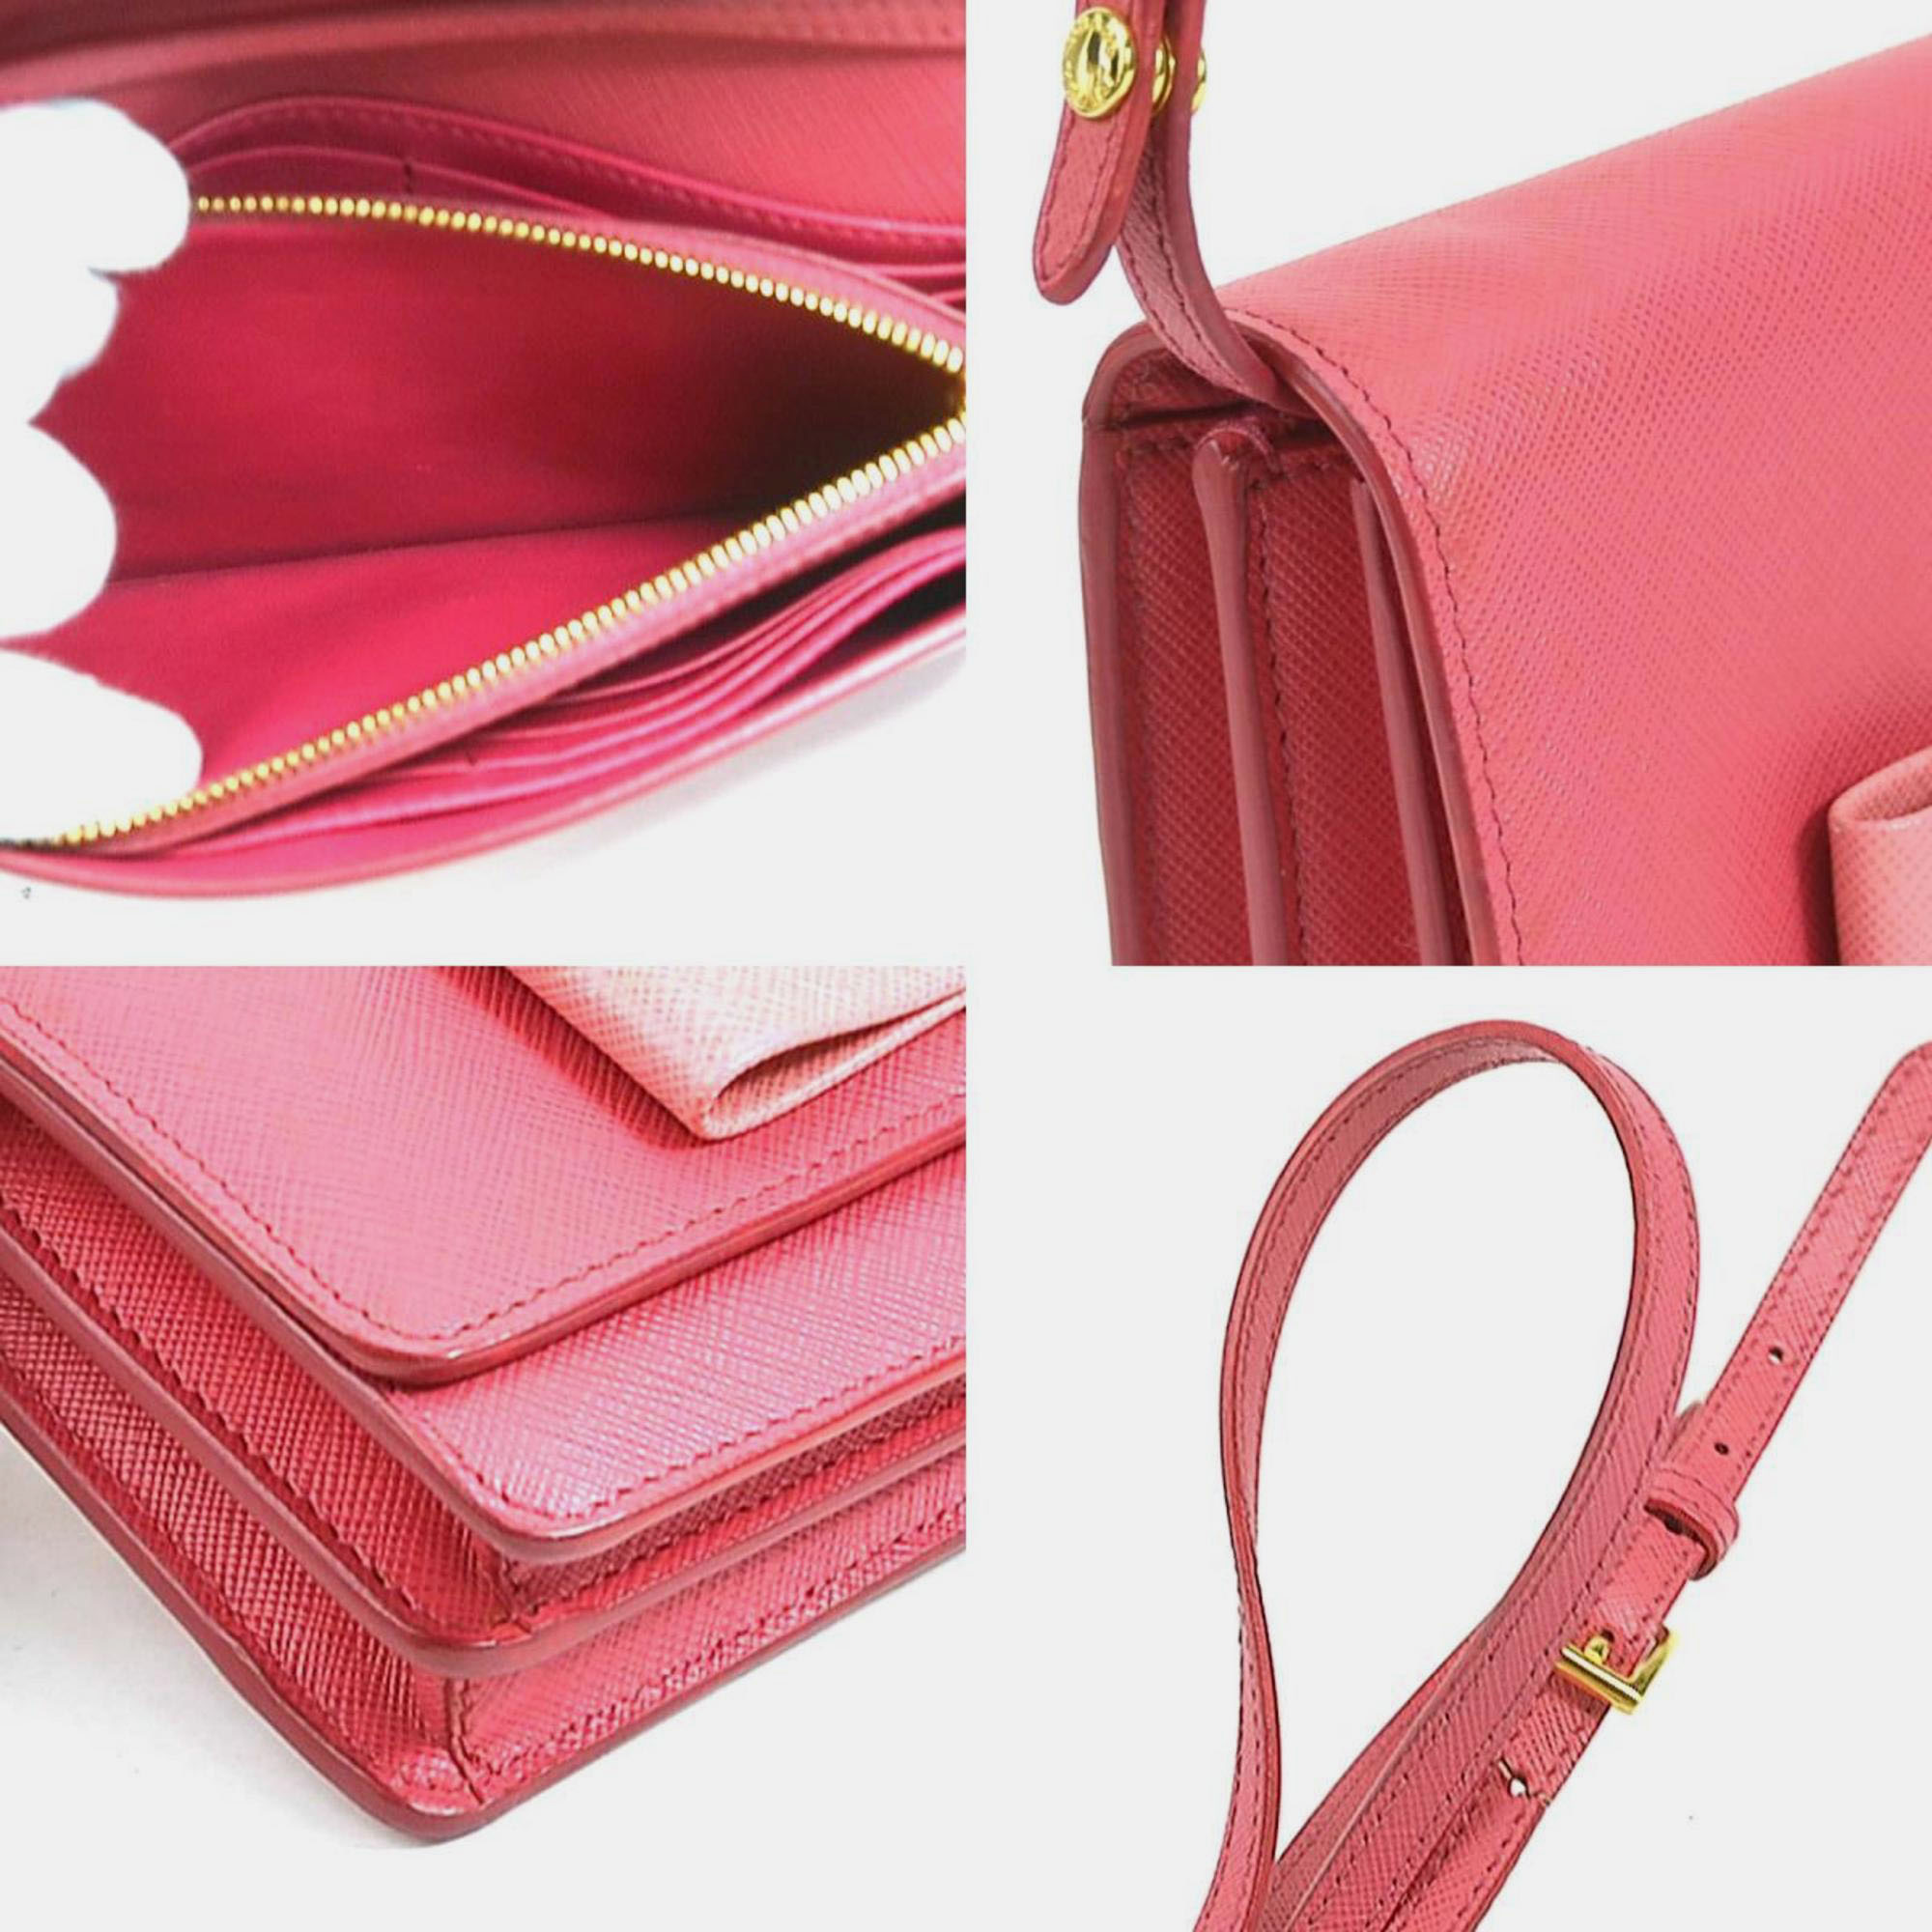 Prada Pink Leather Saffiano Lux Bow Wallet On Chain